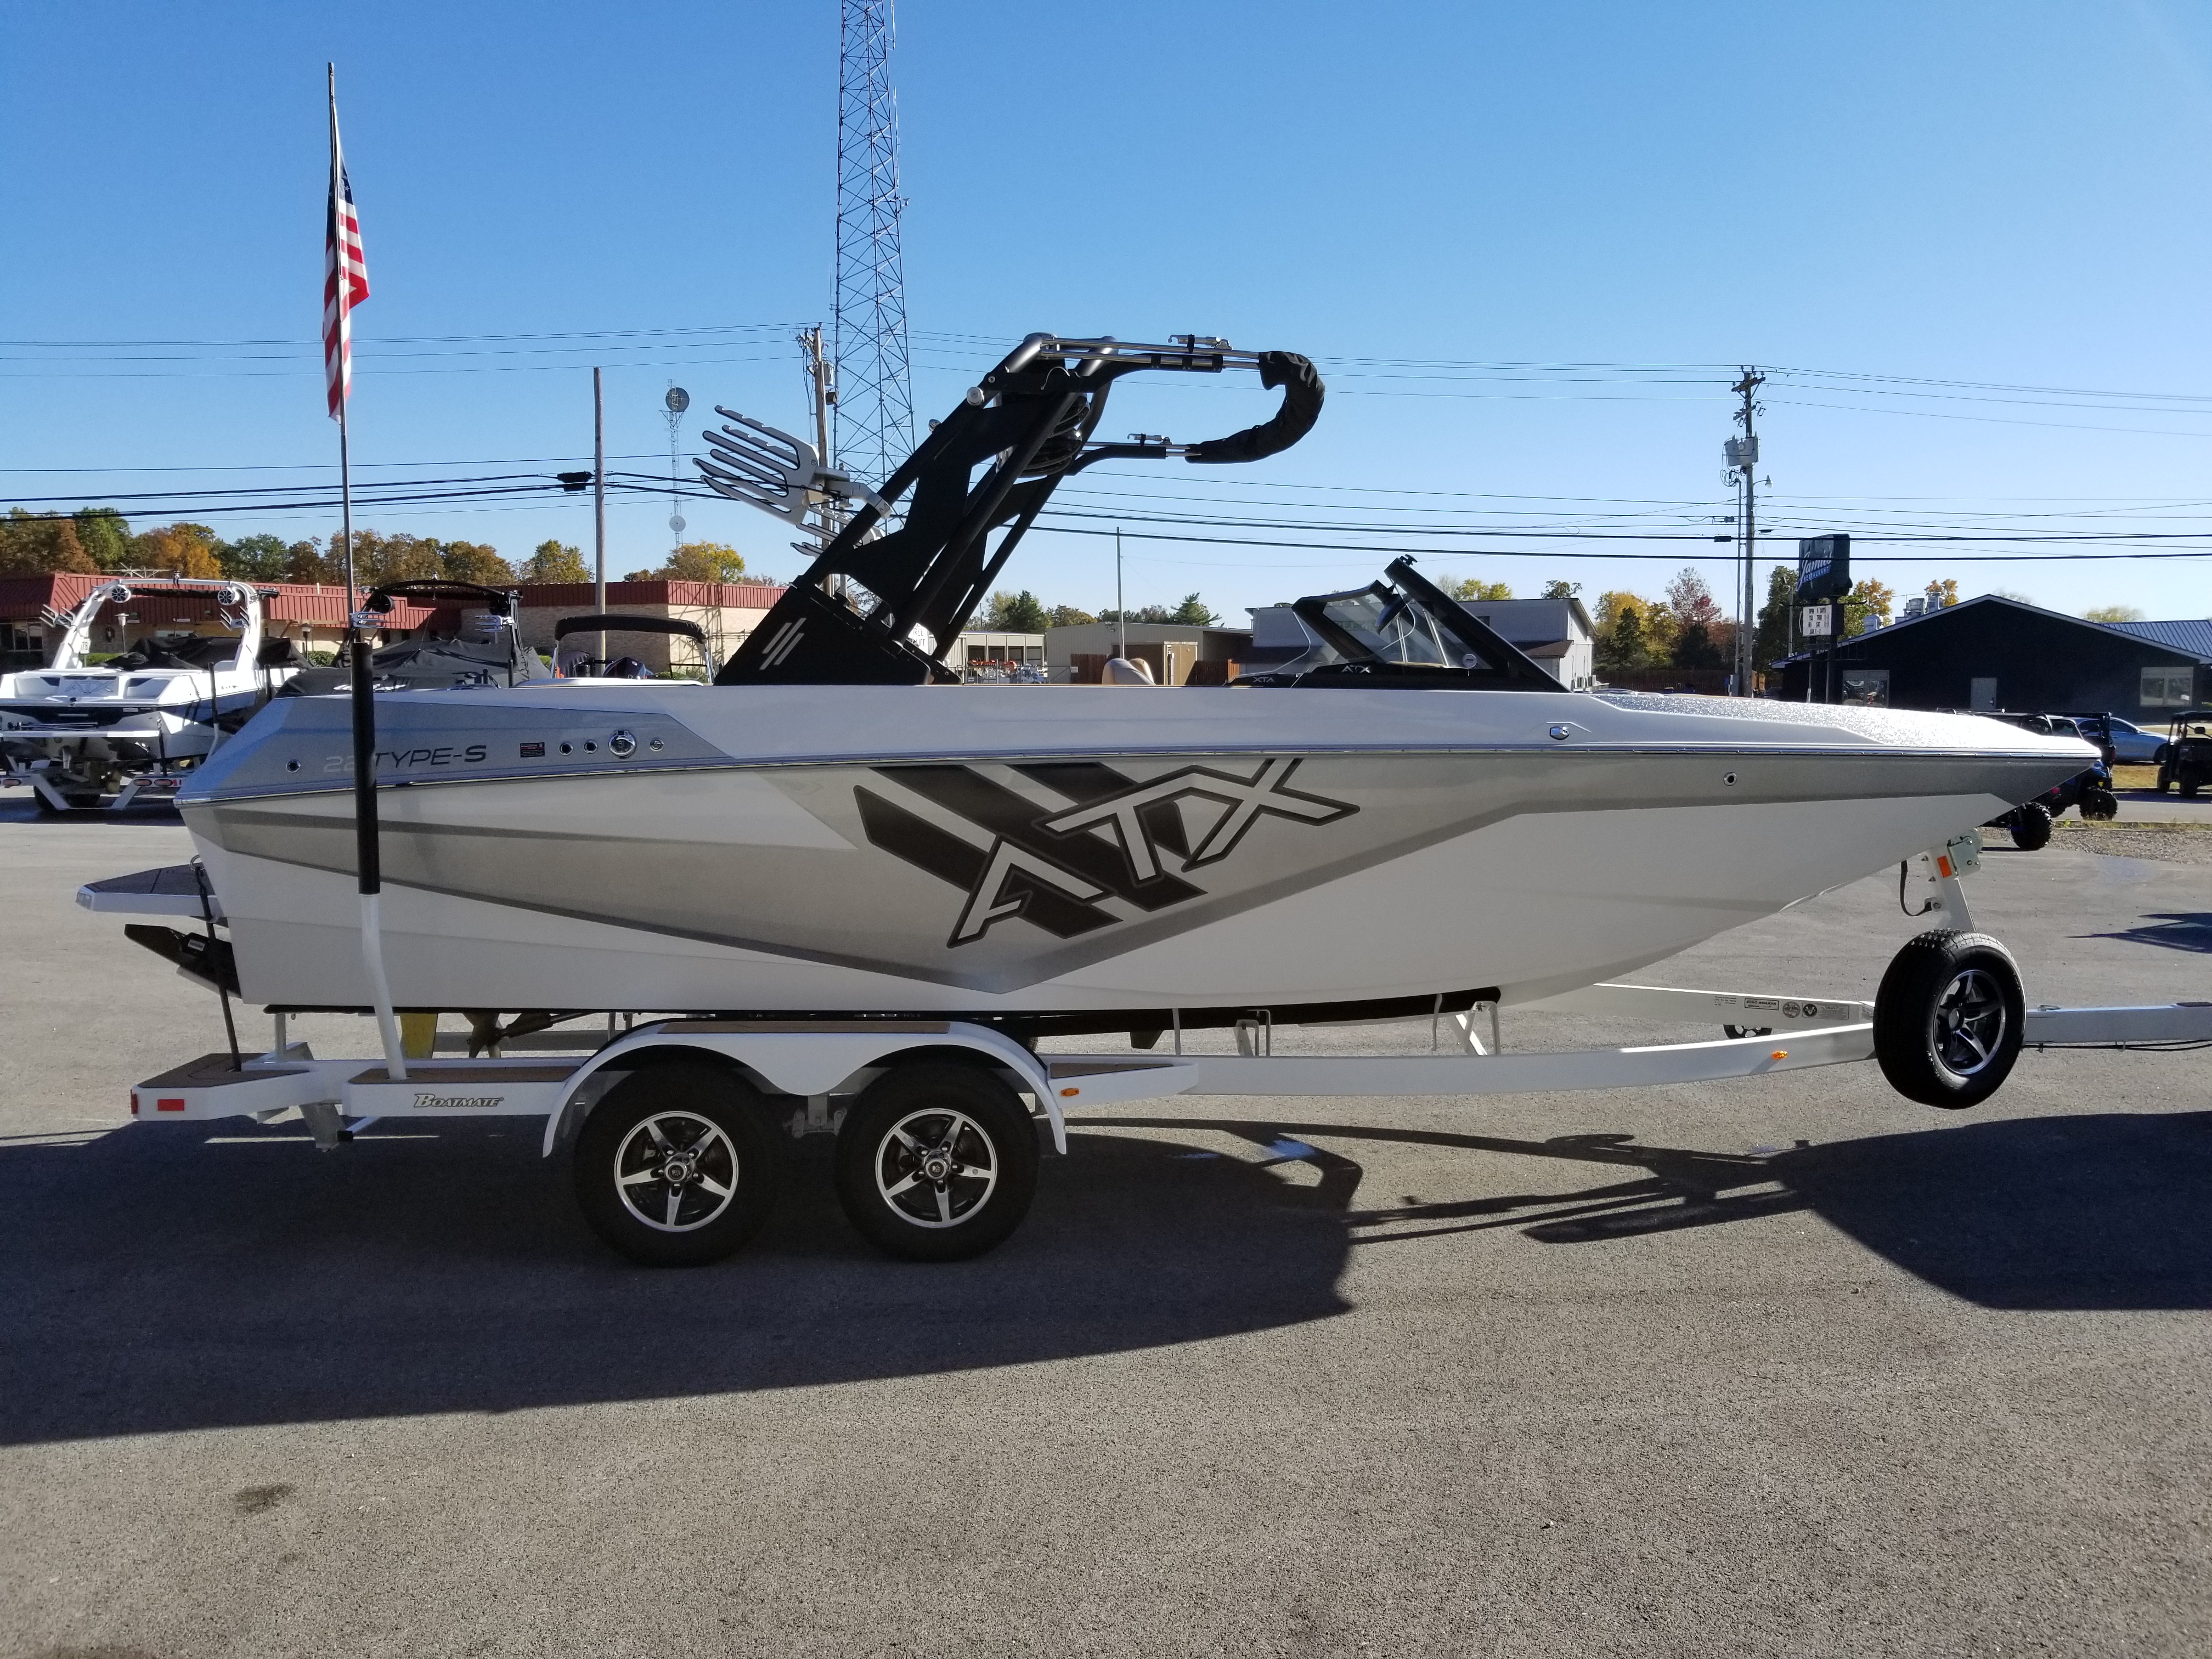 2022 ATX SURF BOATS 22 TYPE-S